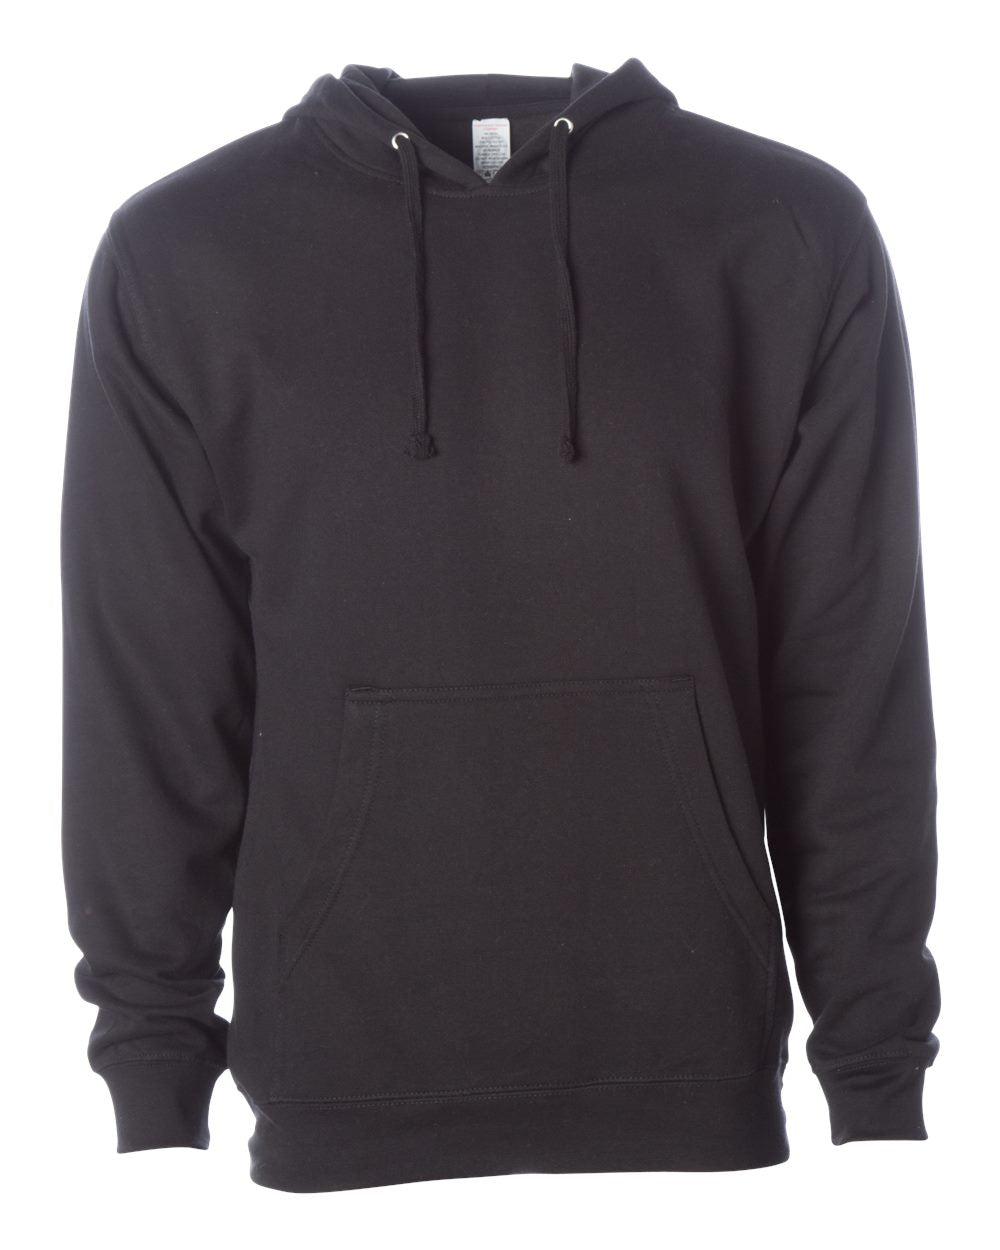 Independent Trading Co. - Midweight Hooded Sweatshirt - SS4500 XS - 5XL